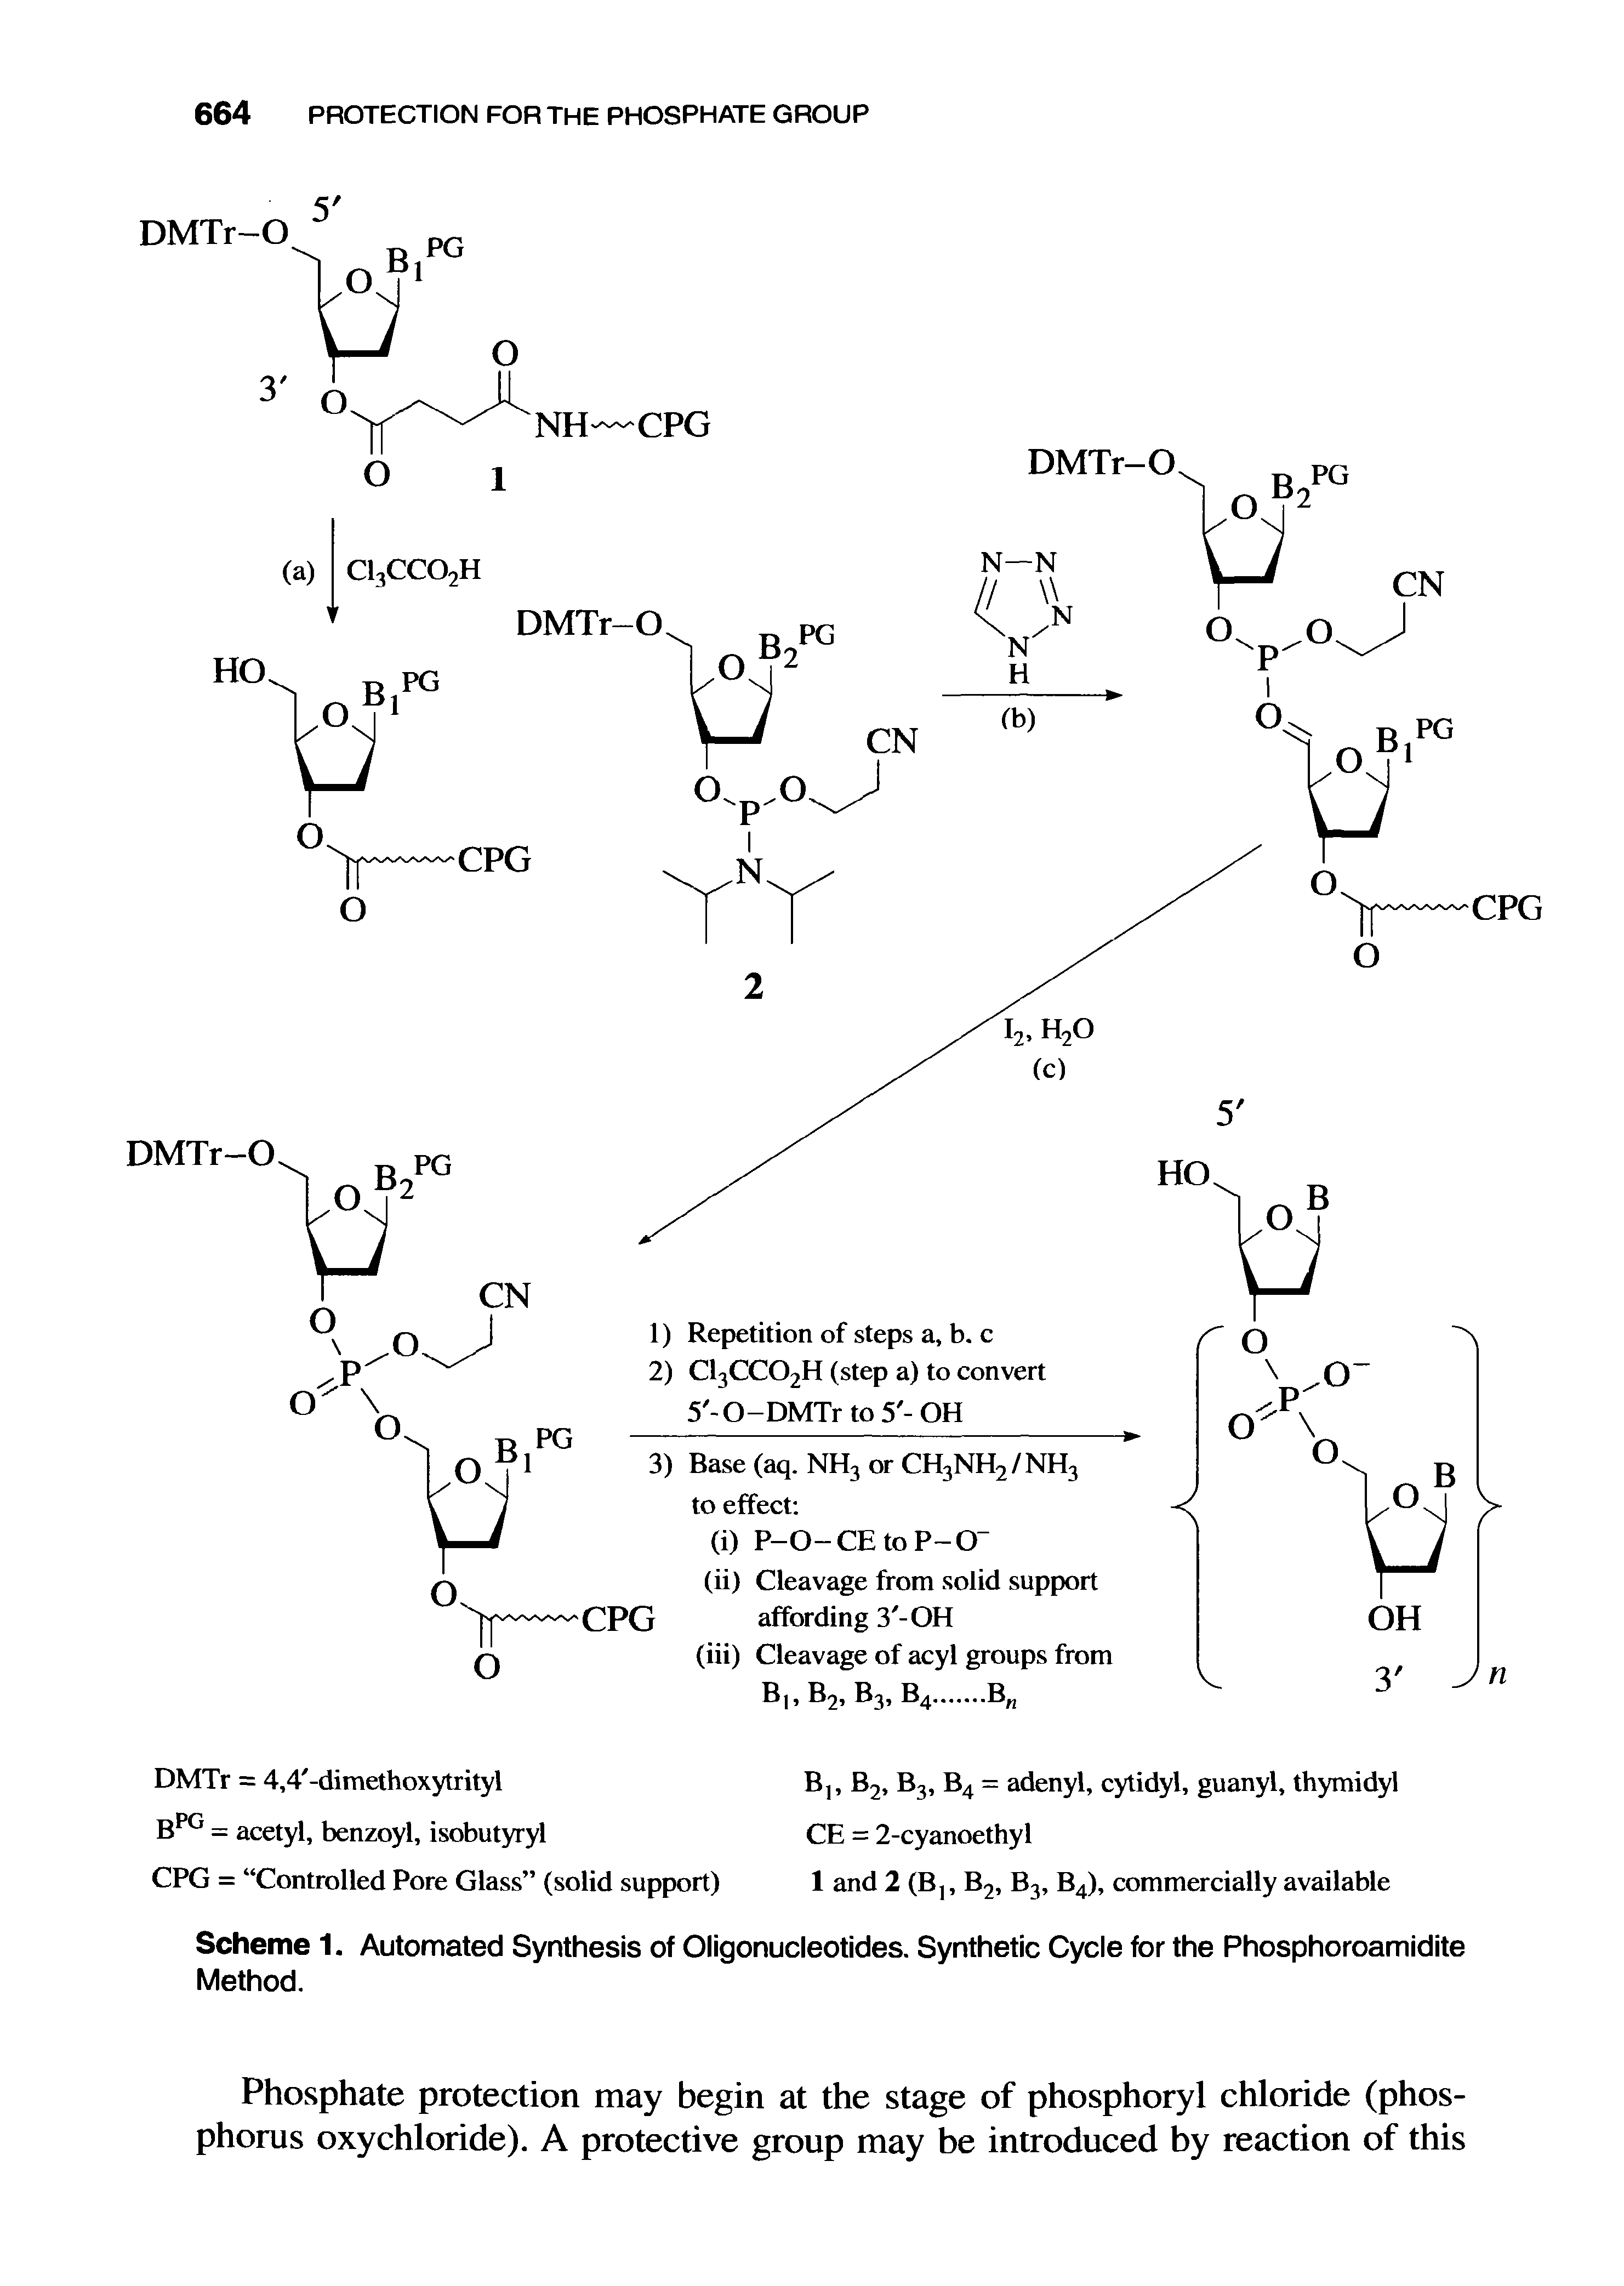 Scheme 1. Automated Synthesis of Oligonucleotides. Synthetic Cycle for the Phosphoroamidite Method.